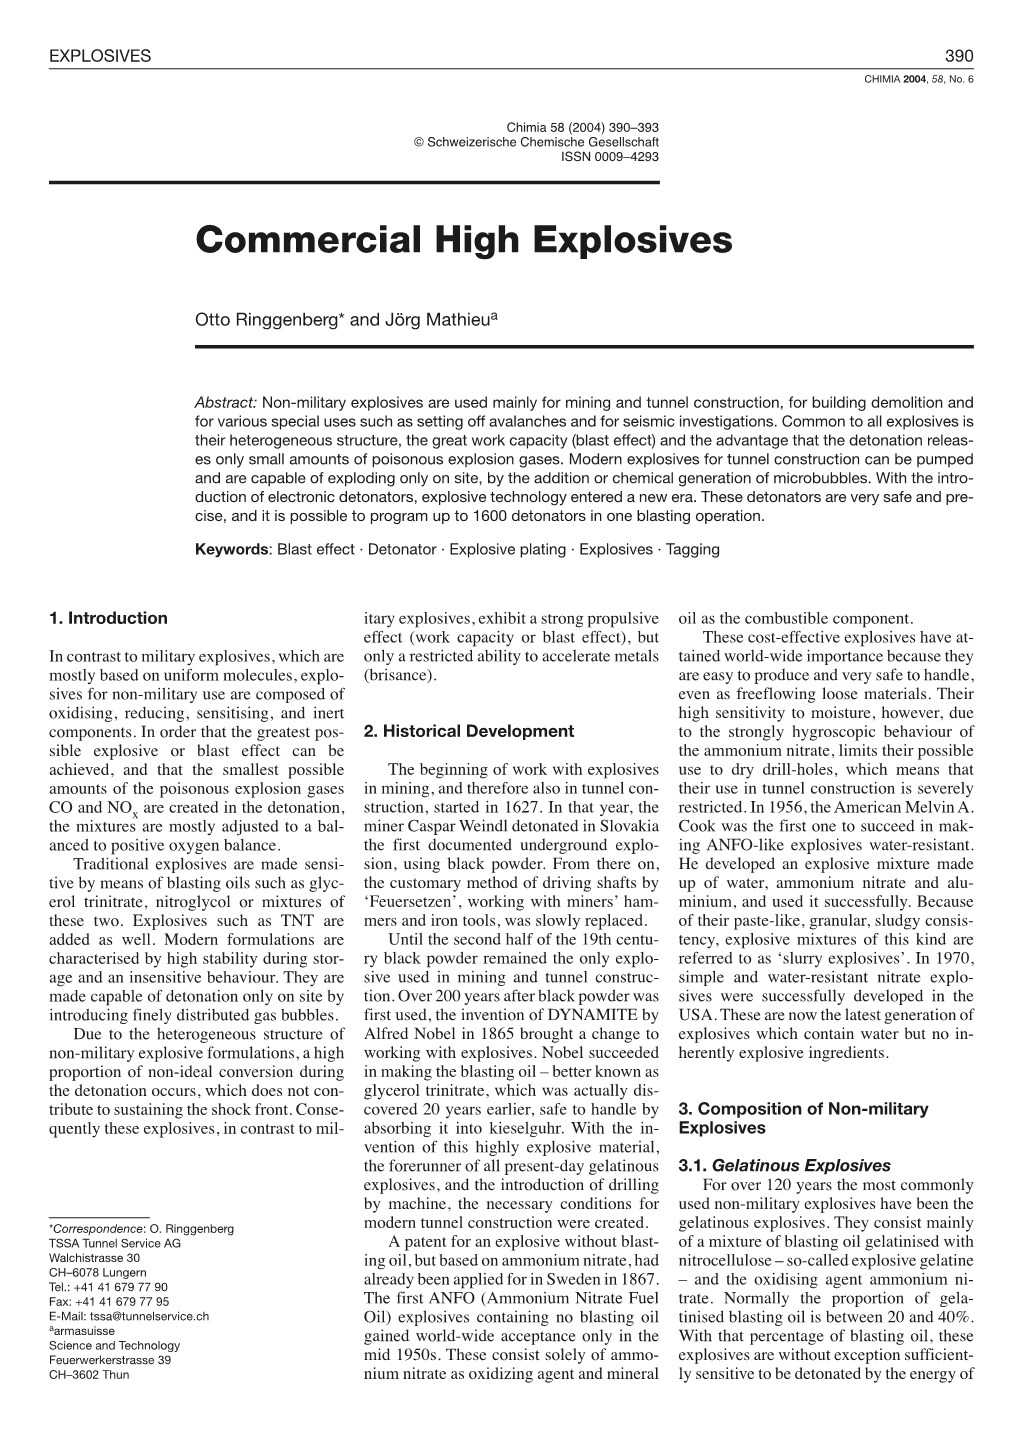 Commercial High Explosives